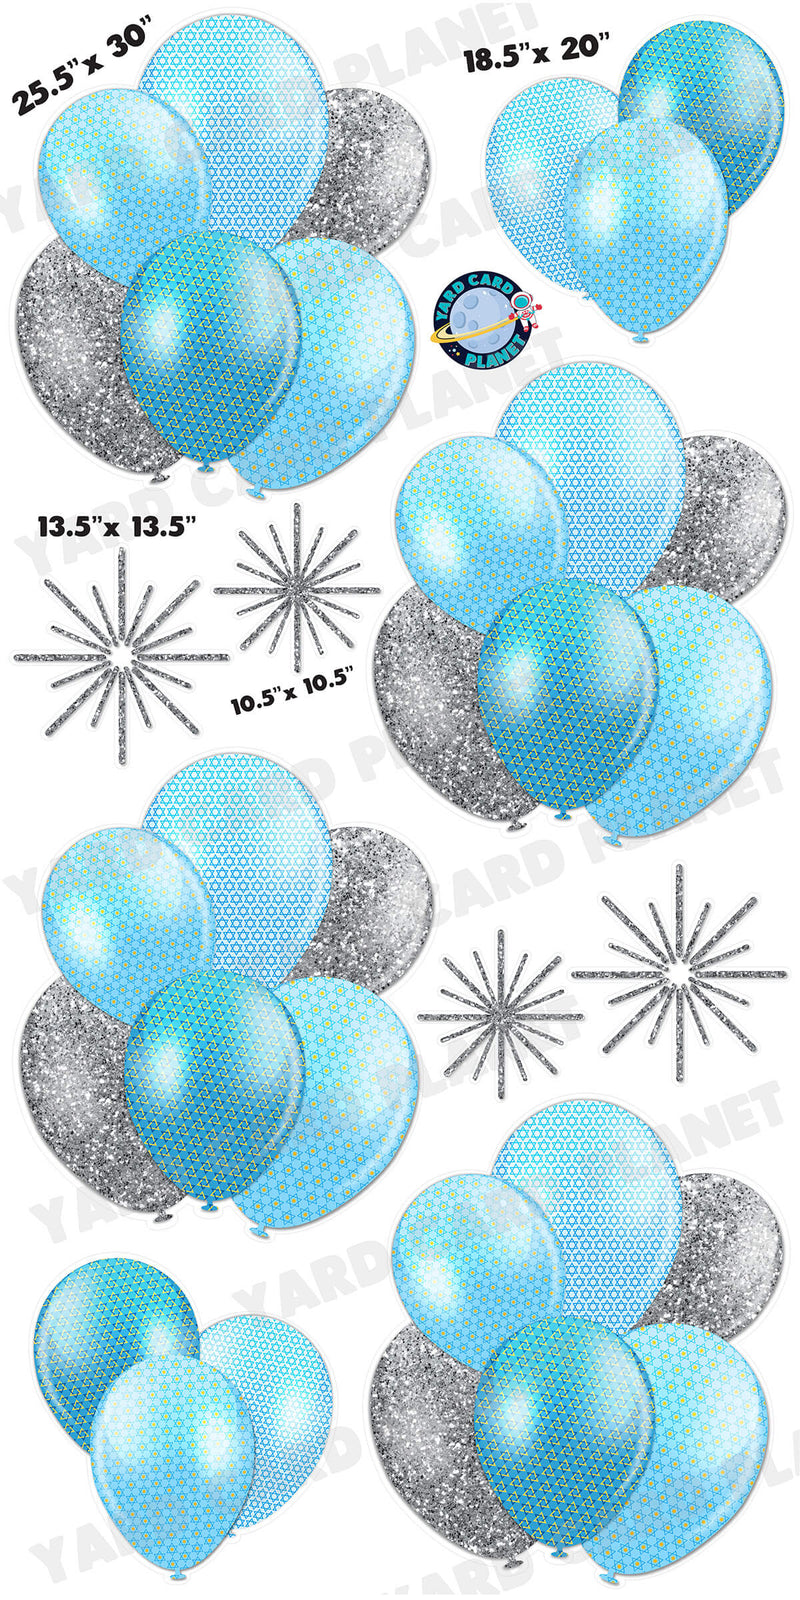 Silver Glitter Pattern Happy Hanukkah Stars of David Balloon Bouquets and Starbursts Yard Card Set with Measurements